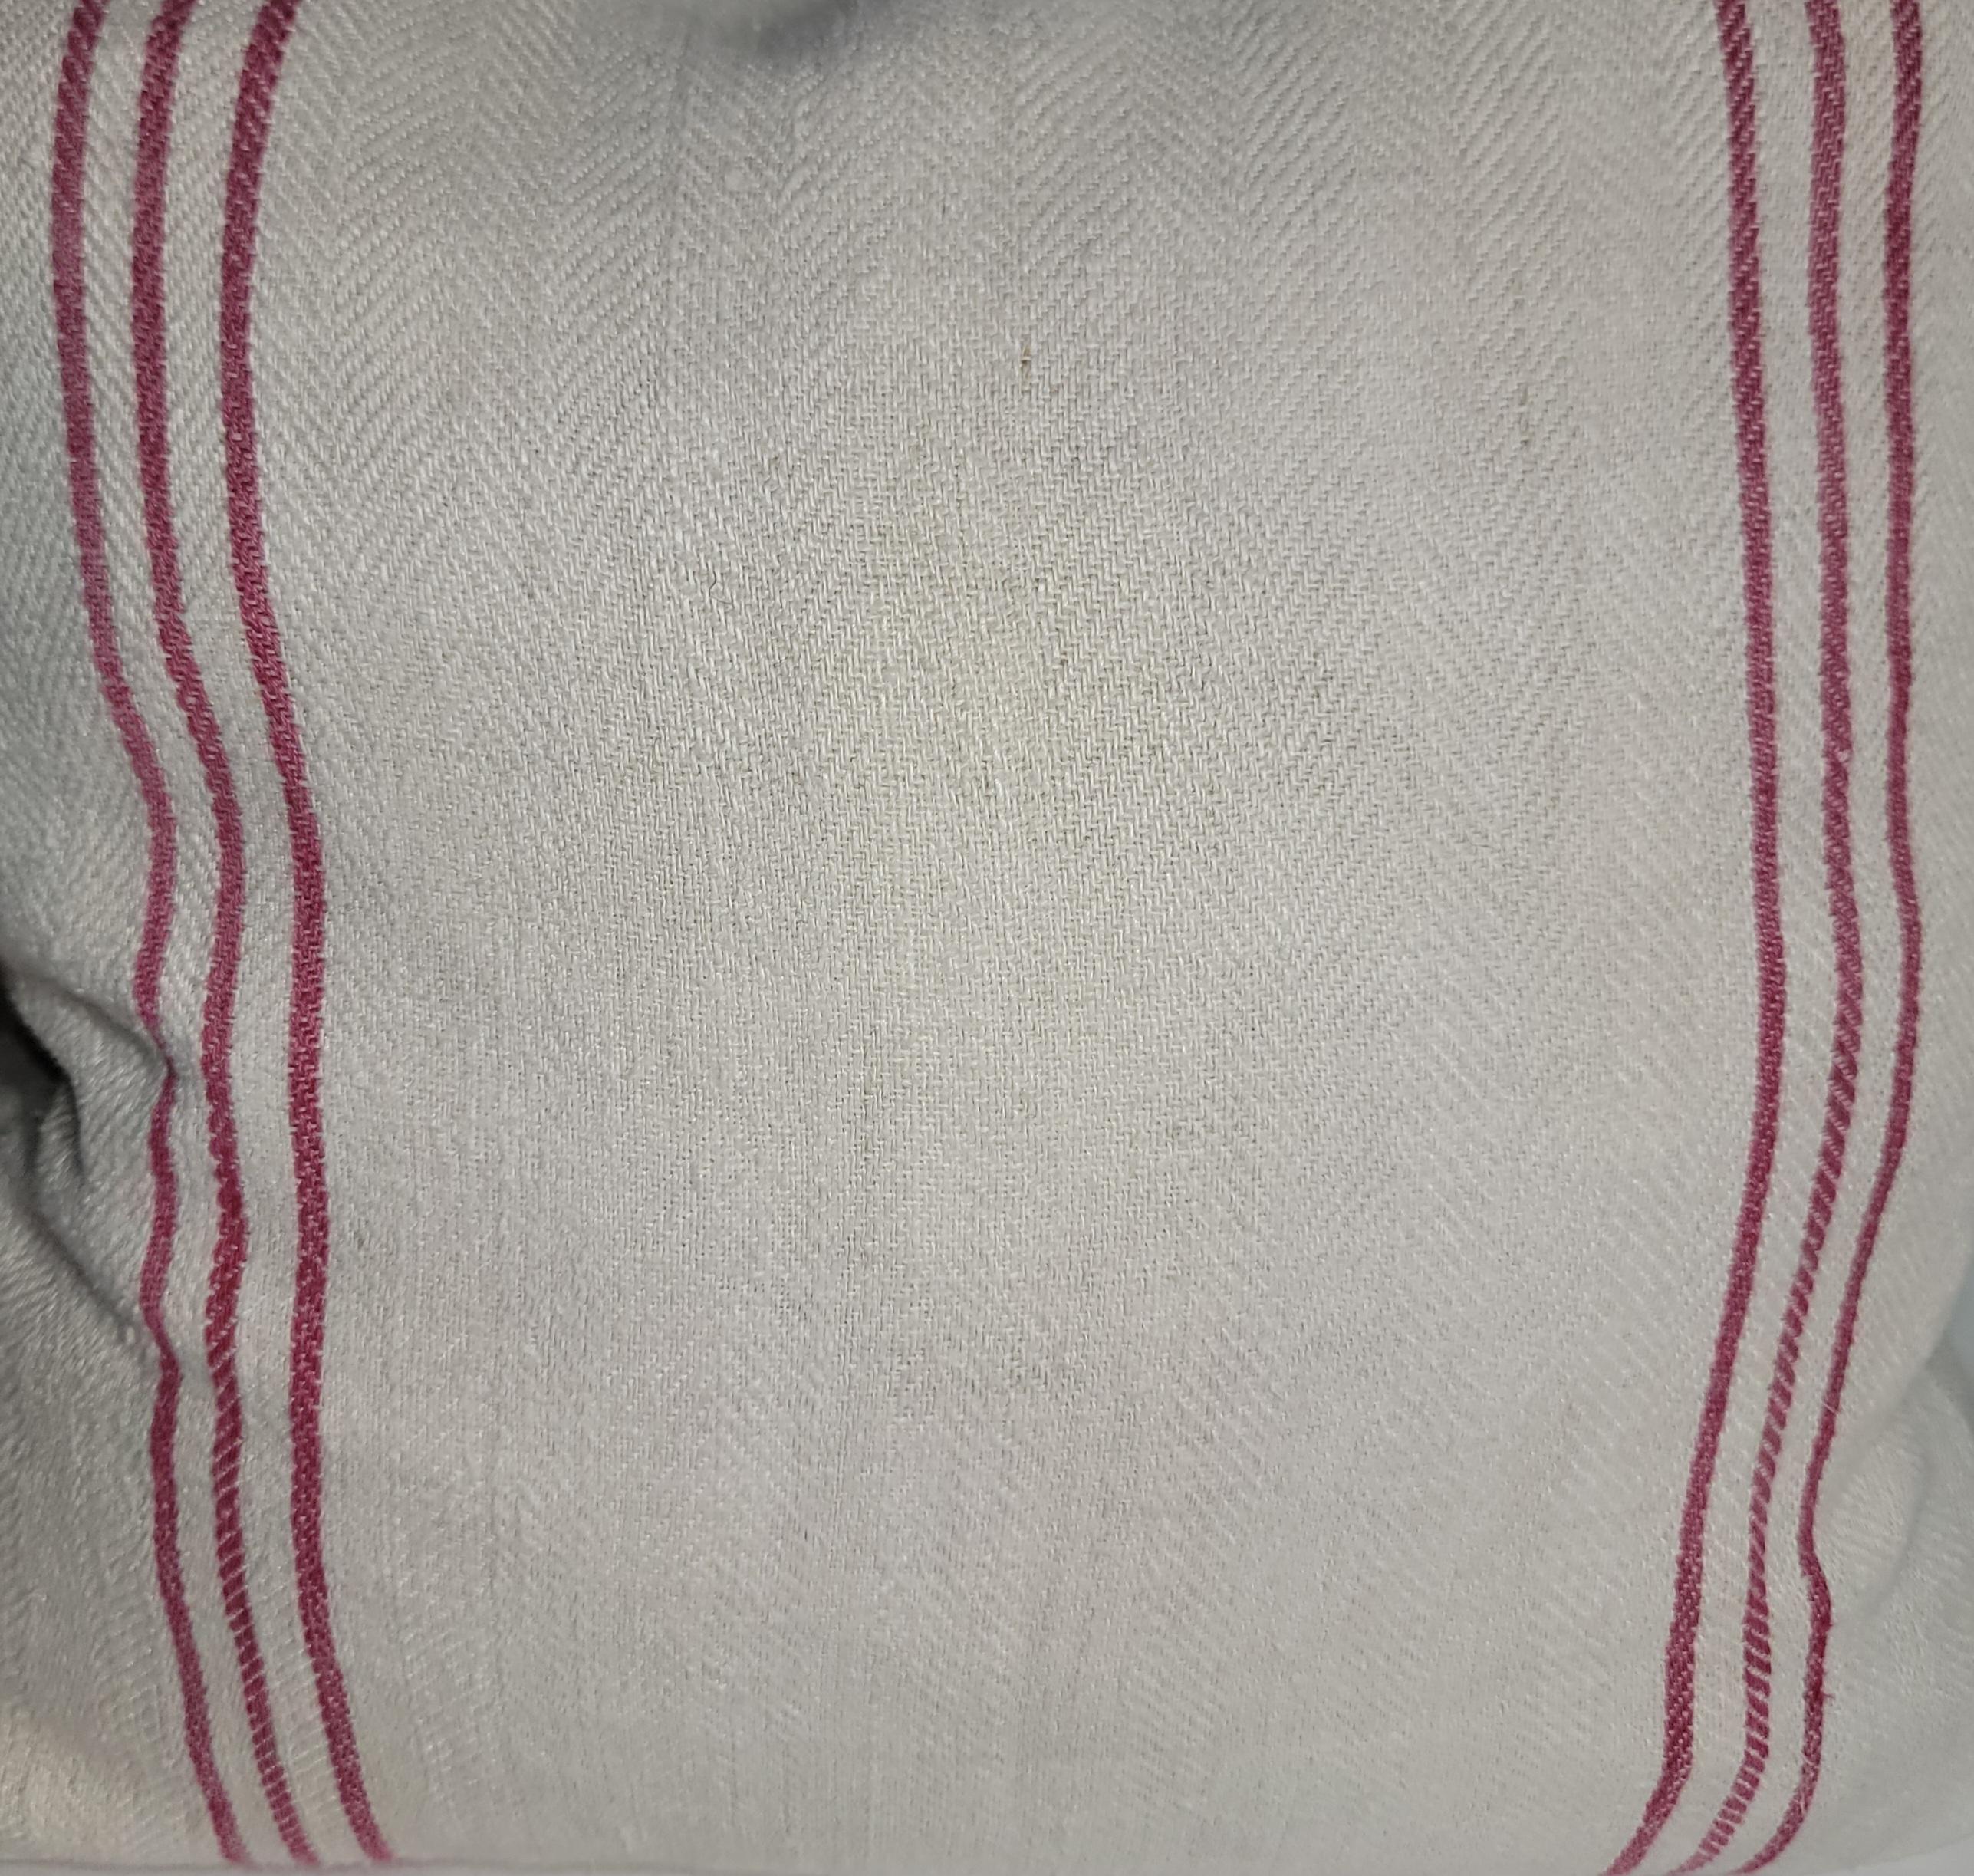 19thc Striped Cotton Linen Double Sided Pillows. This beautiful linen has simple red lines on one side of the pillow that are very attractive and the backing is a plain linen. The linen has been professionally laundered and has down and feather